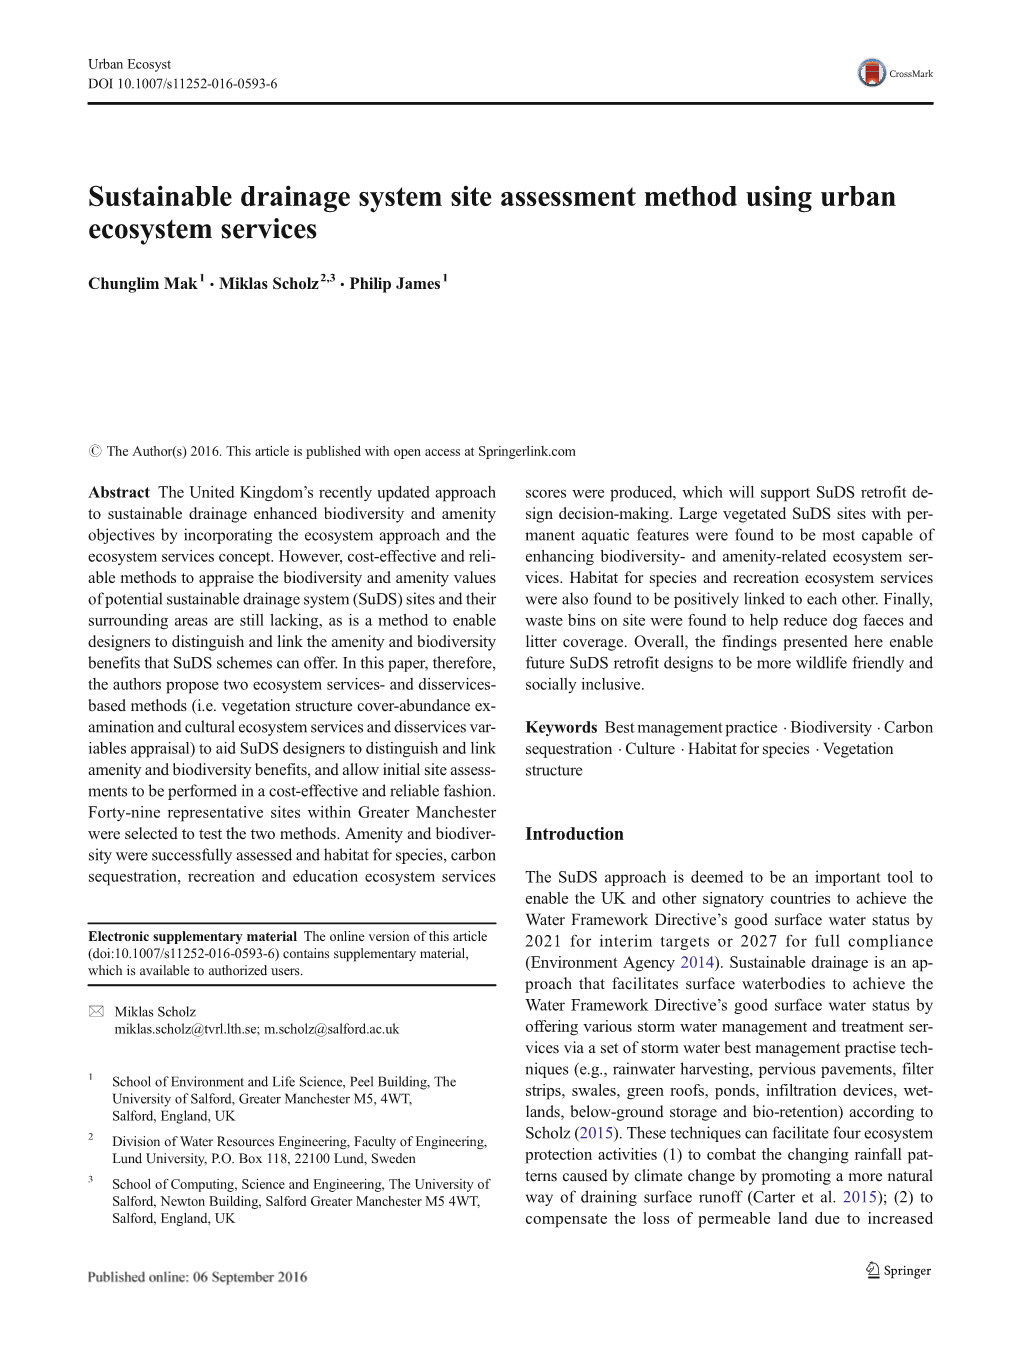 Sustainable Drainage System Site Assessment Method Using Urban Ecosystem Services